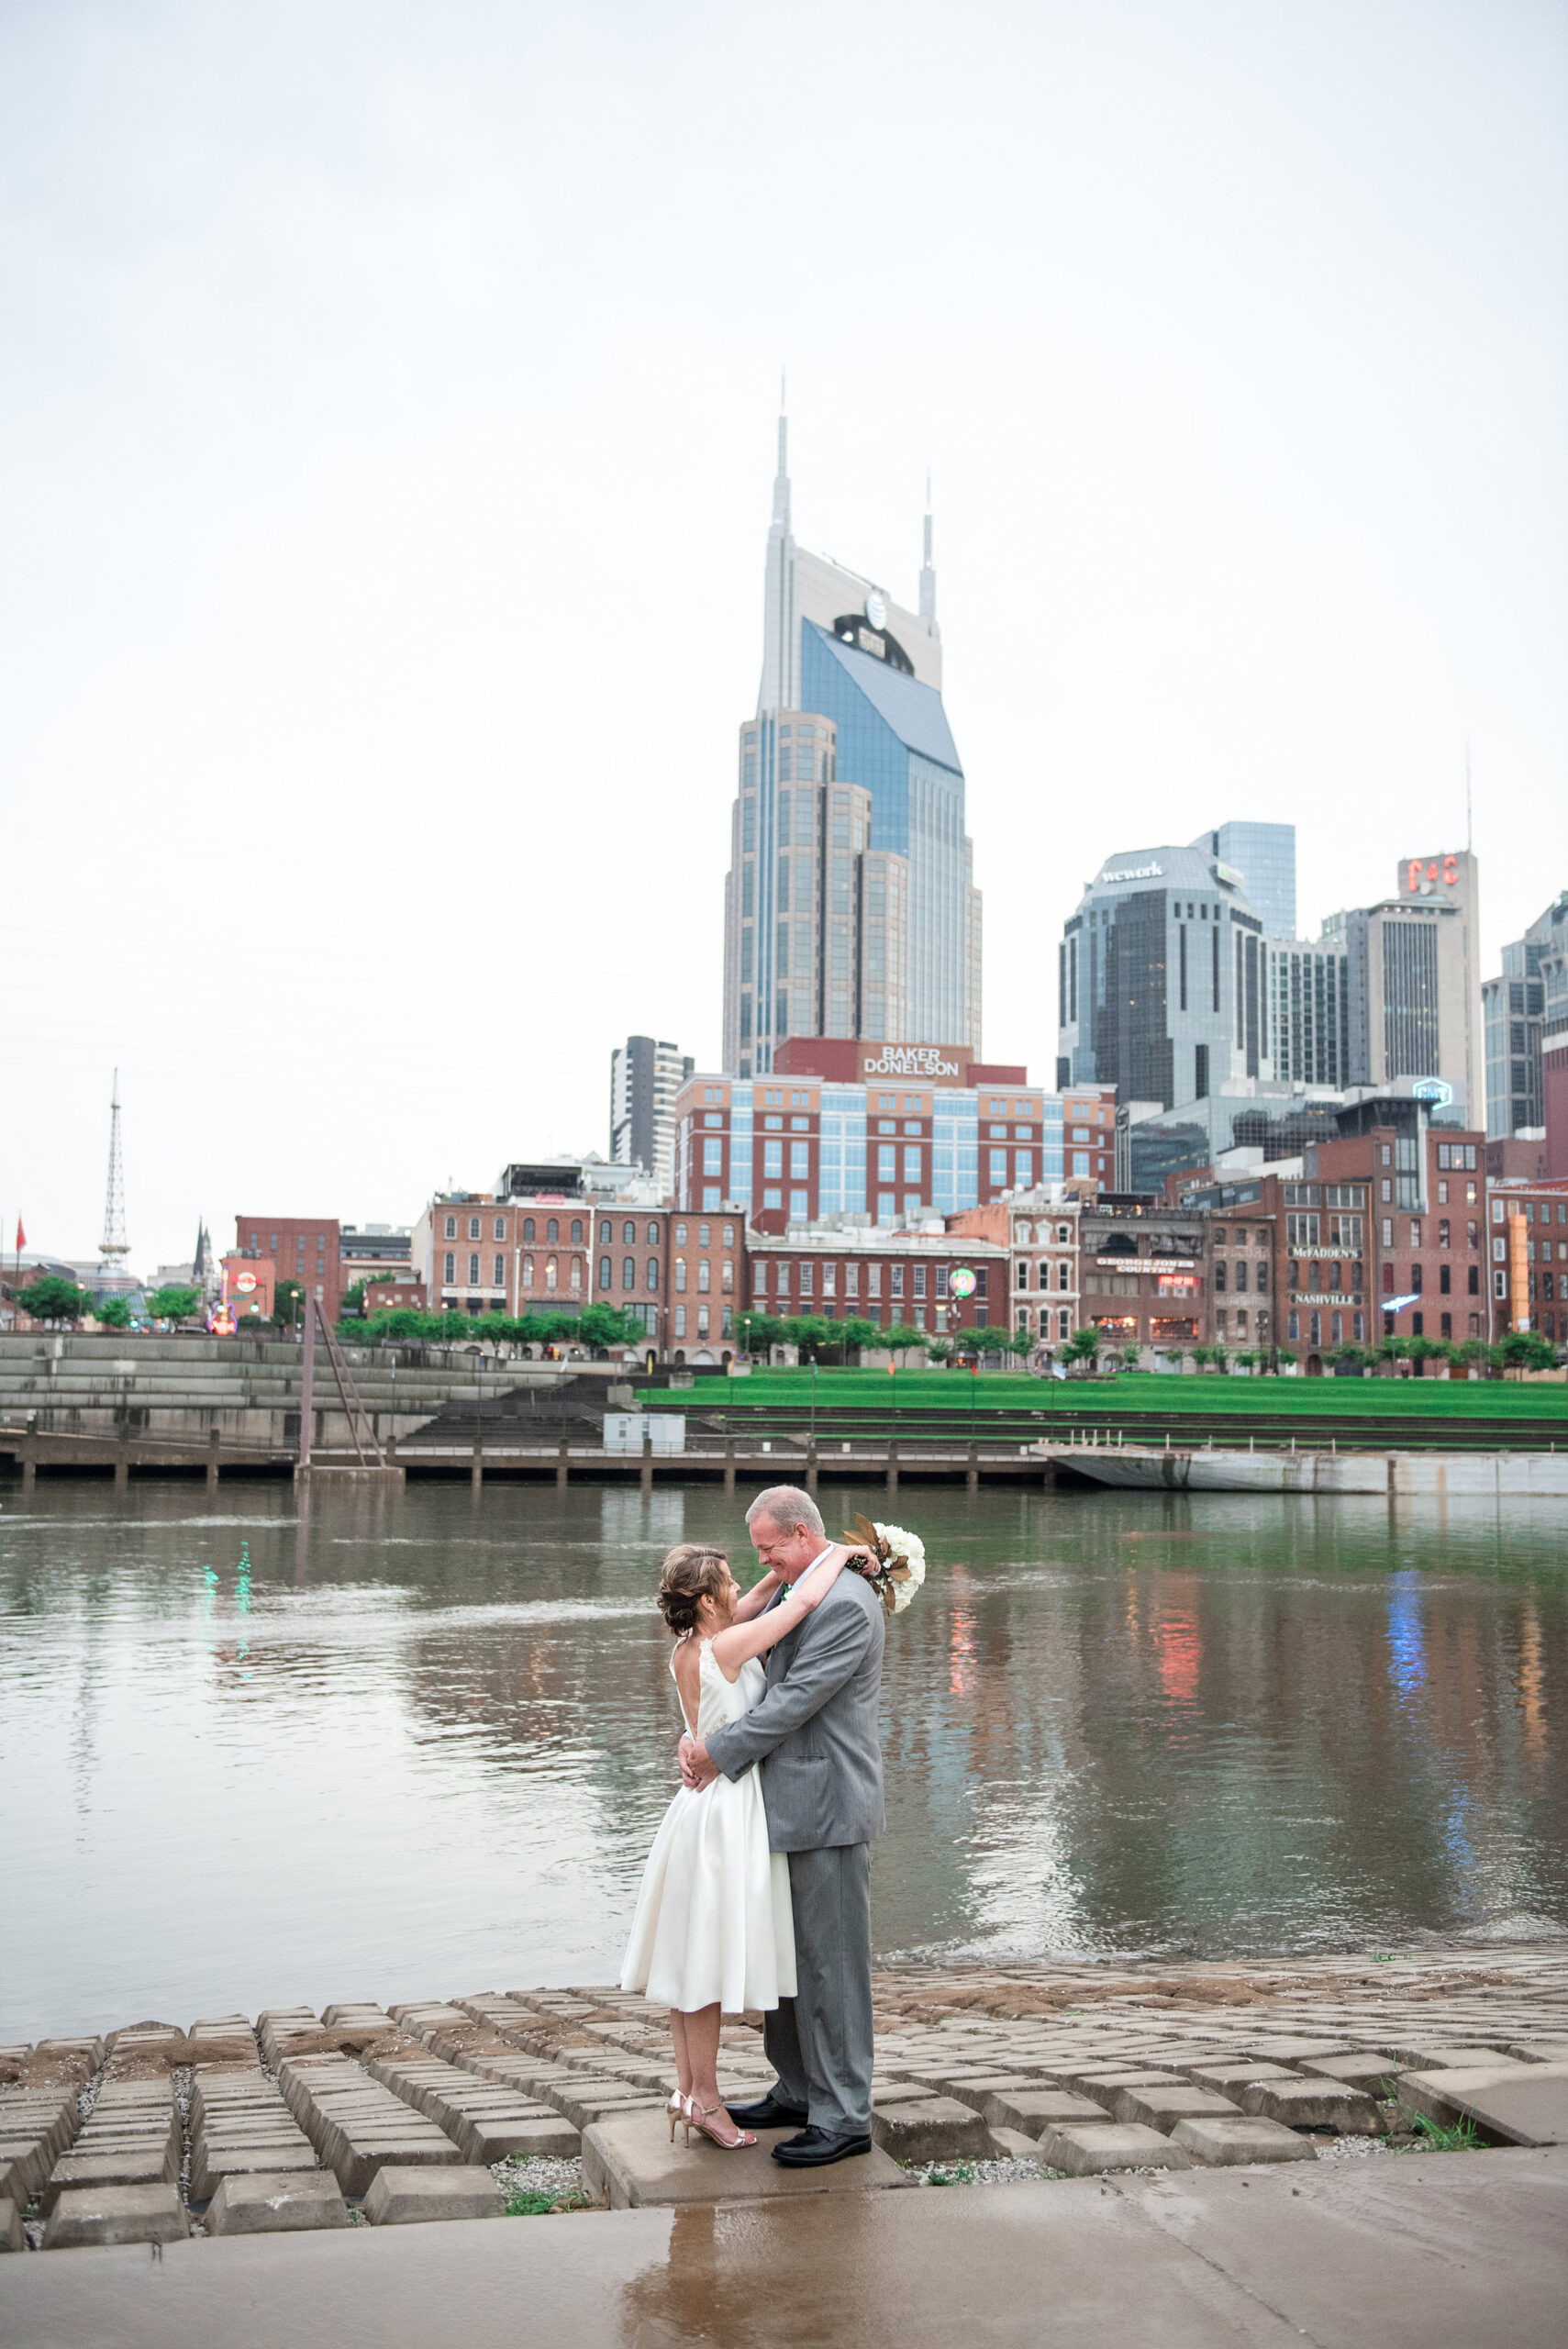 Standing at the riverfront smiling up at each other the bride and groom embrace. The bride is wearing a tea length sleeveless wedding dress with a plunging back and gold strappy heels. The groom  is wearing a gray suit with black shoes. The Cumberland River, the Batman Building and Nashville skyline are in the background behind them. The bride has her arms around the groom's neck and is holding a large white bouquet of roses and hydrangea with magnolia leaves.